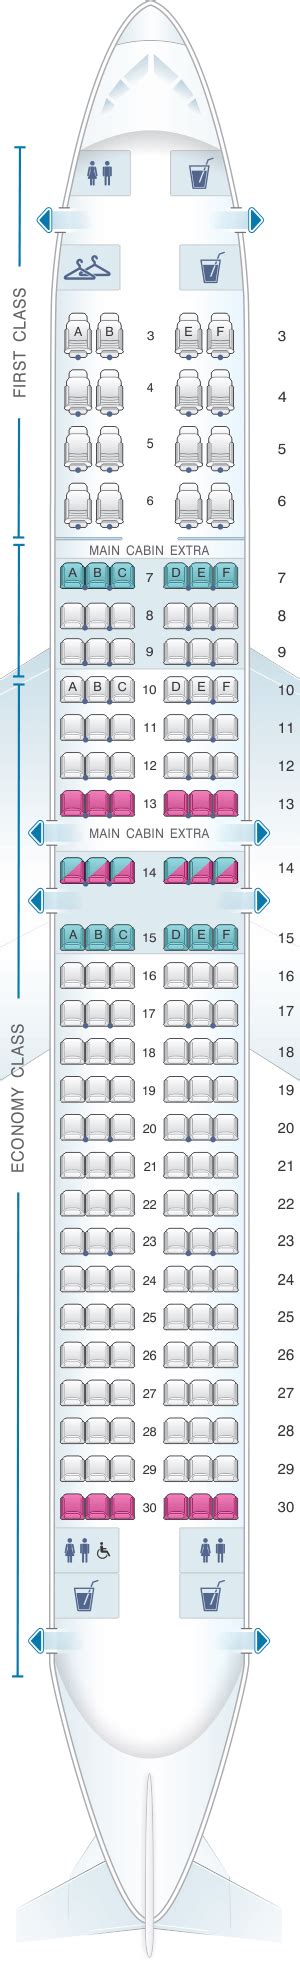 American Airline Boeing 737 800 Seat Map Awesome Home